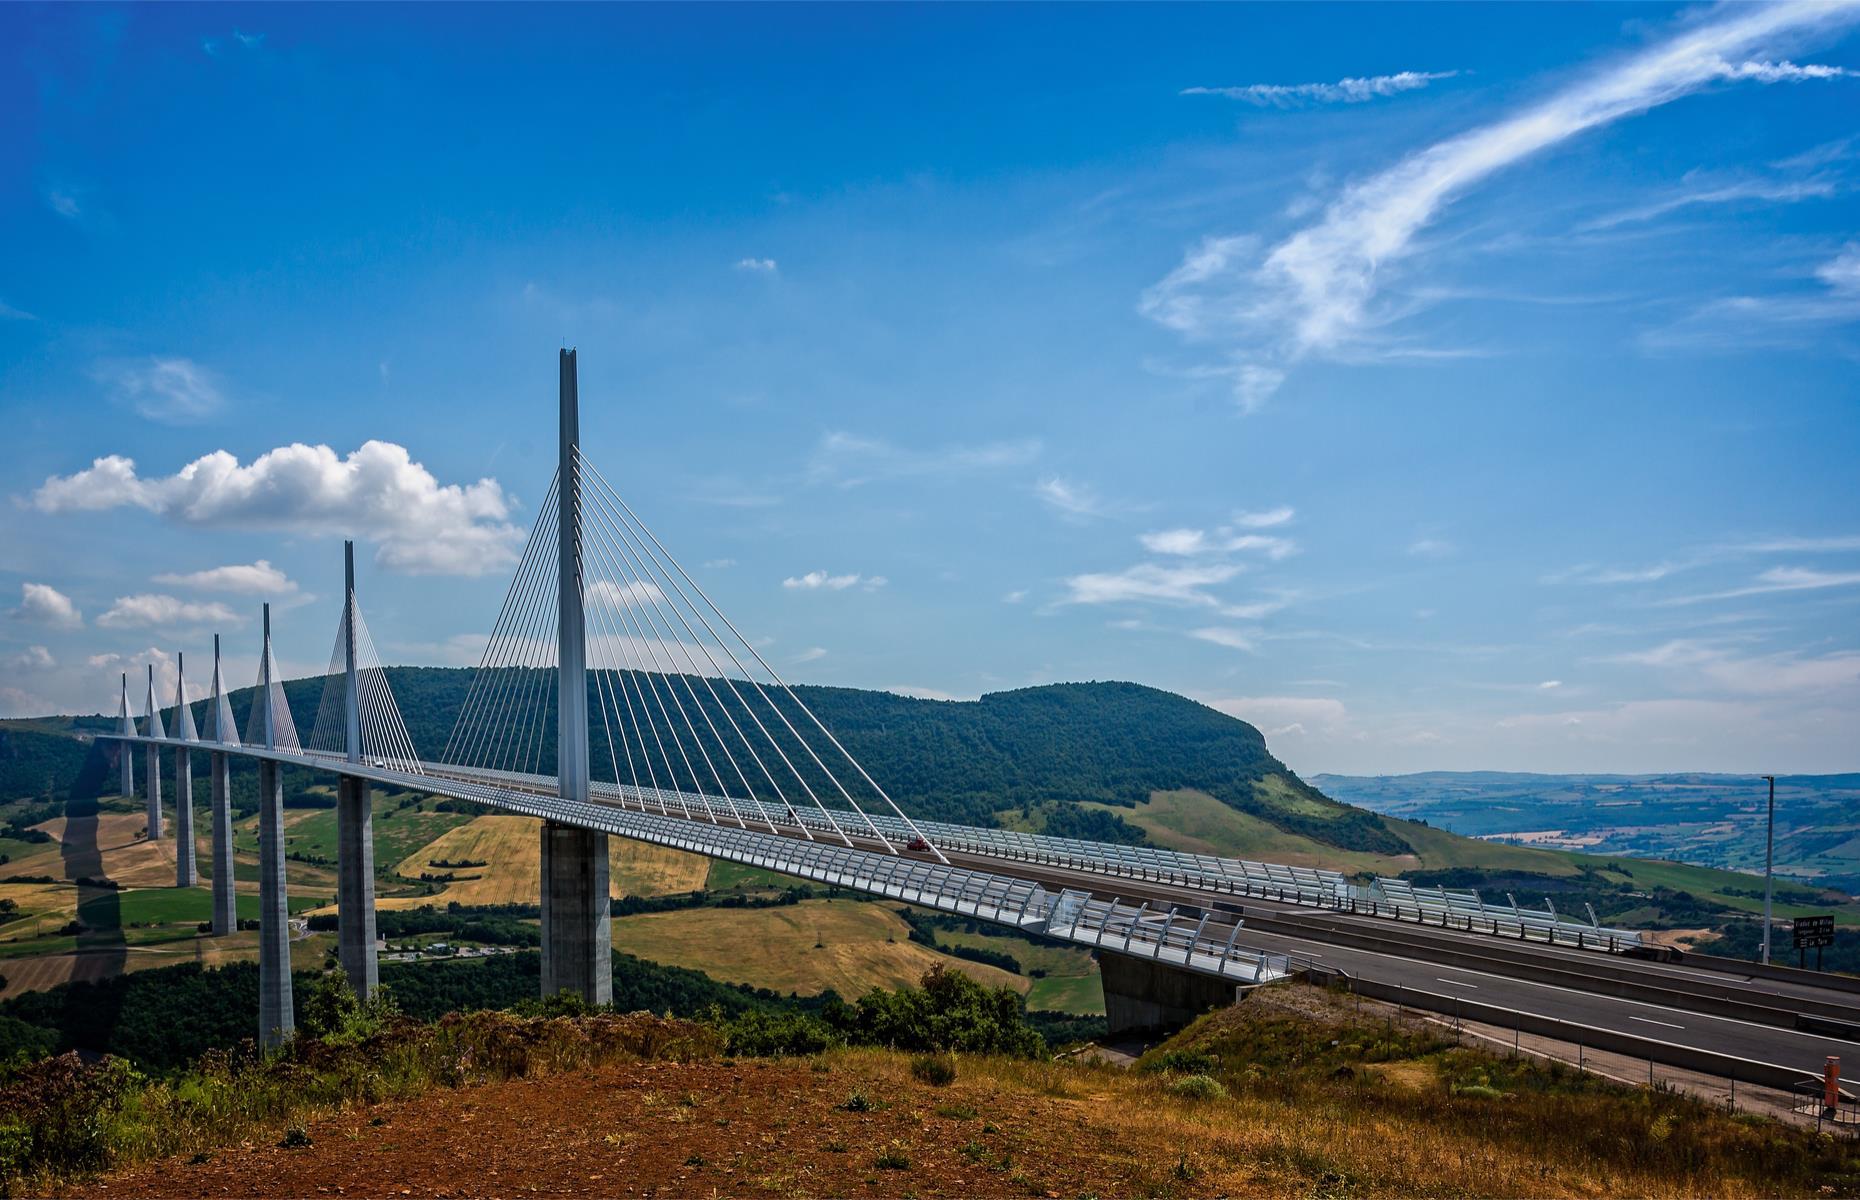 Stretching proudly across the River Tarn in southern France, the Millau Suspension Bridge is an incredible structure. Follow the A75 autoroute to cross what is the world's tallest bridge and marvel at its engineering as well as the soaring views of the river and Massif Central mountains. In some parts, it's taller than the Eiffel Tower. The bridge, which opened in 2004, isn't accessible for pedestrians.